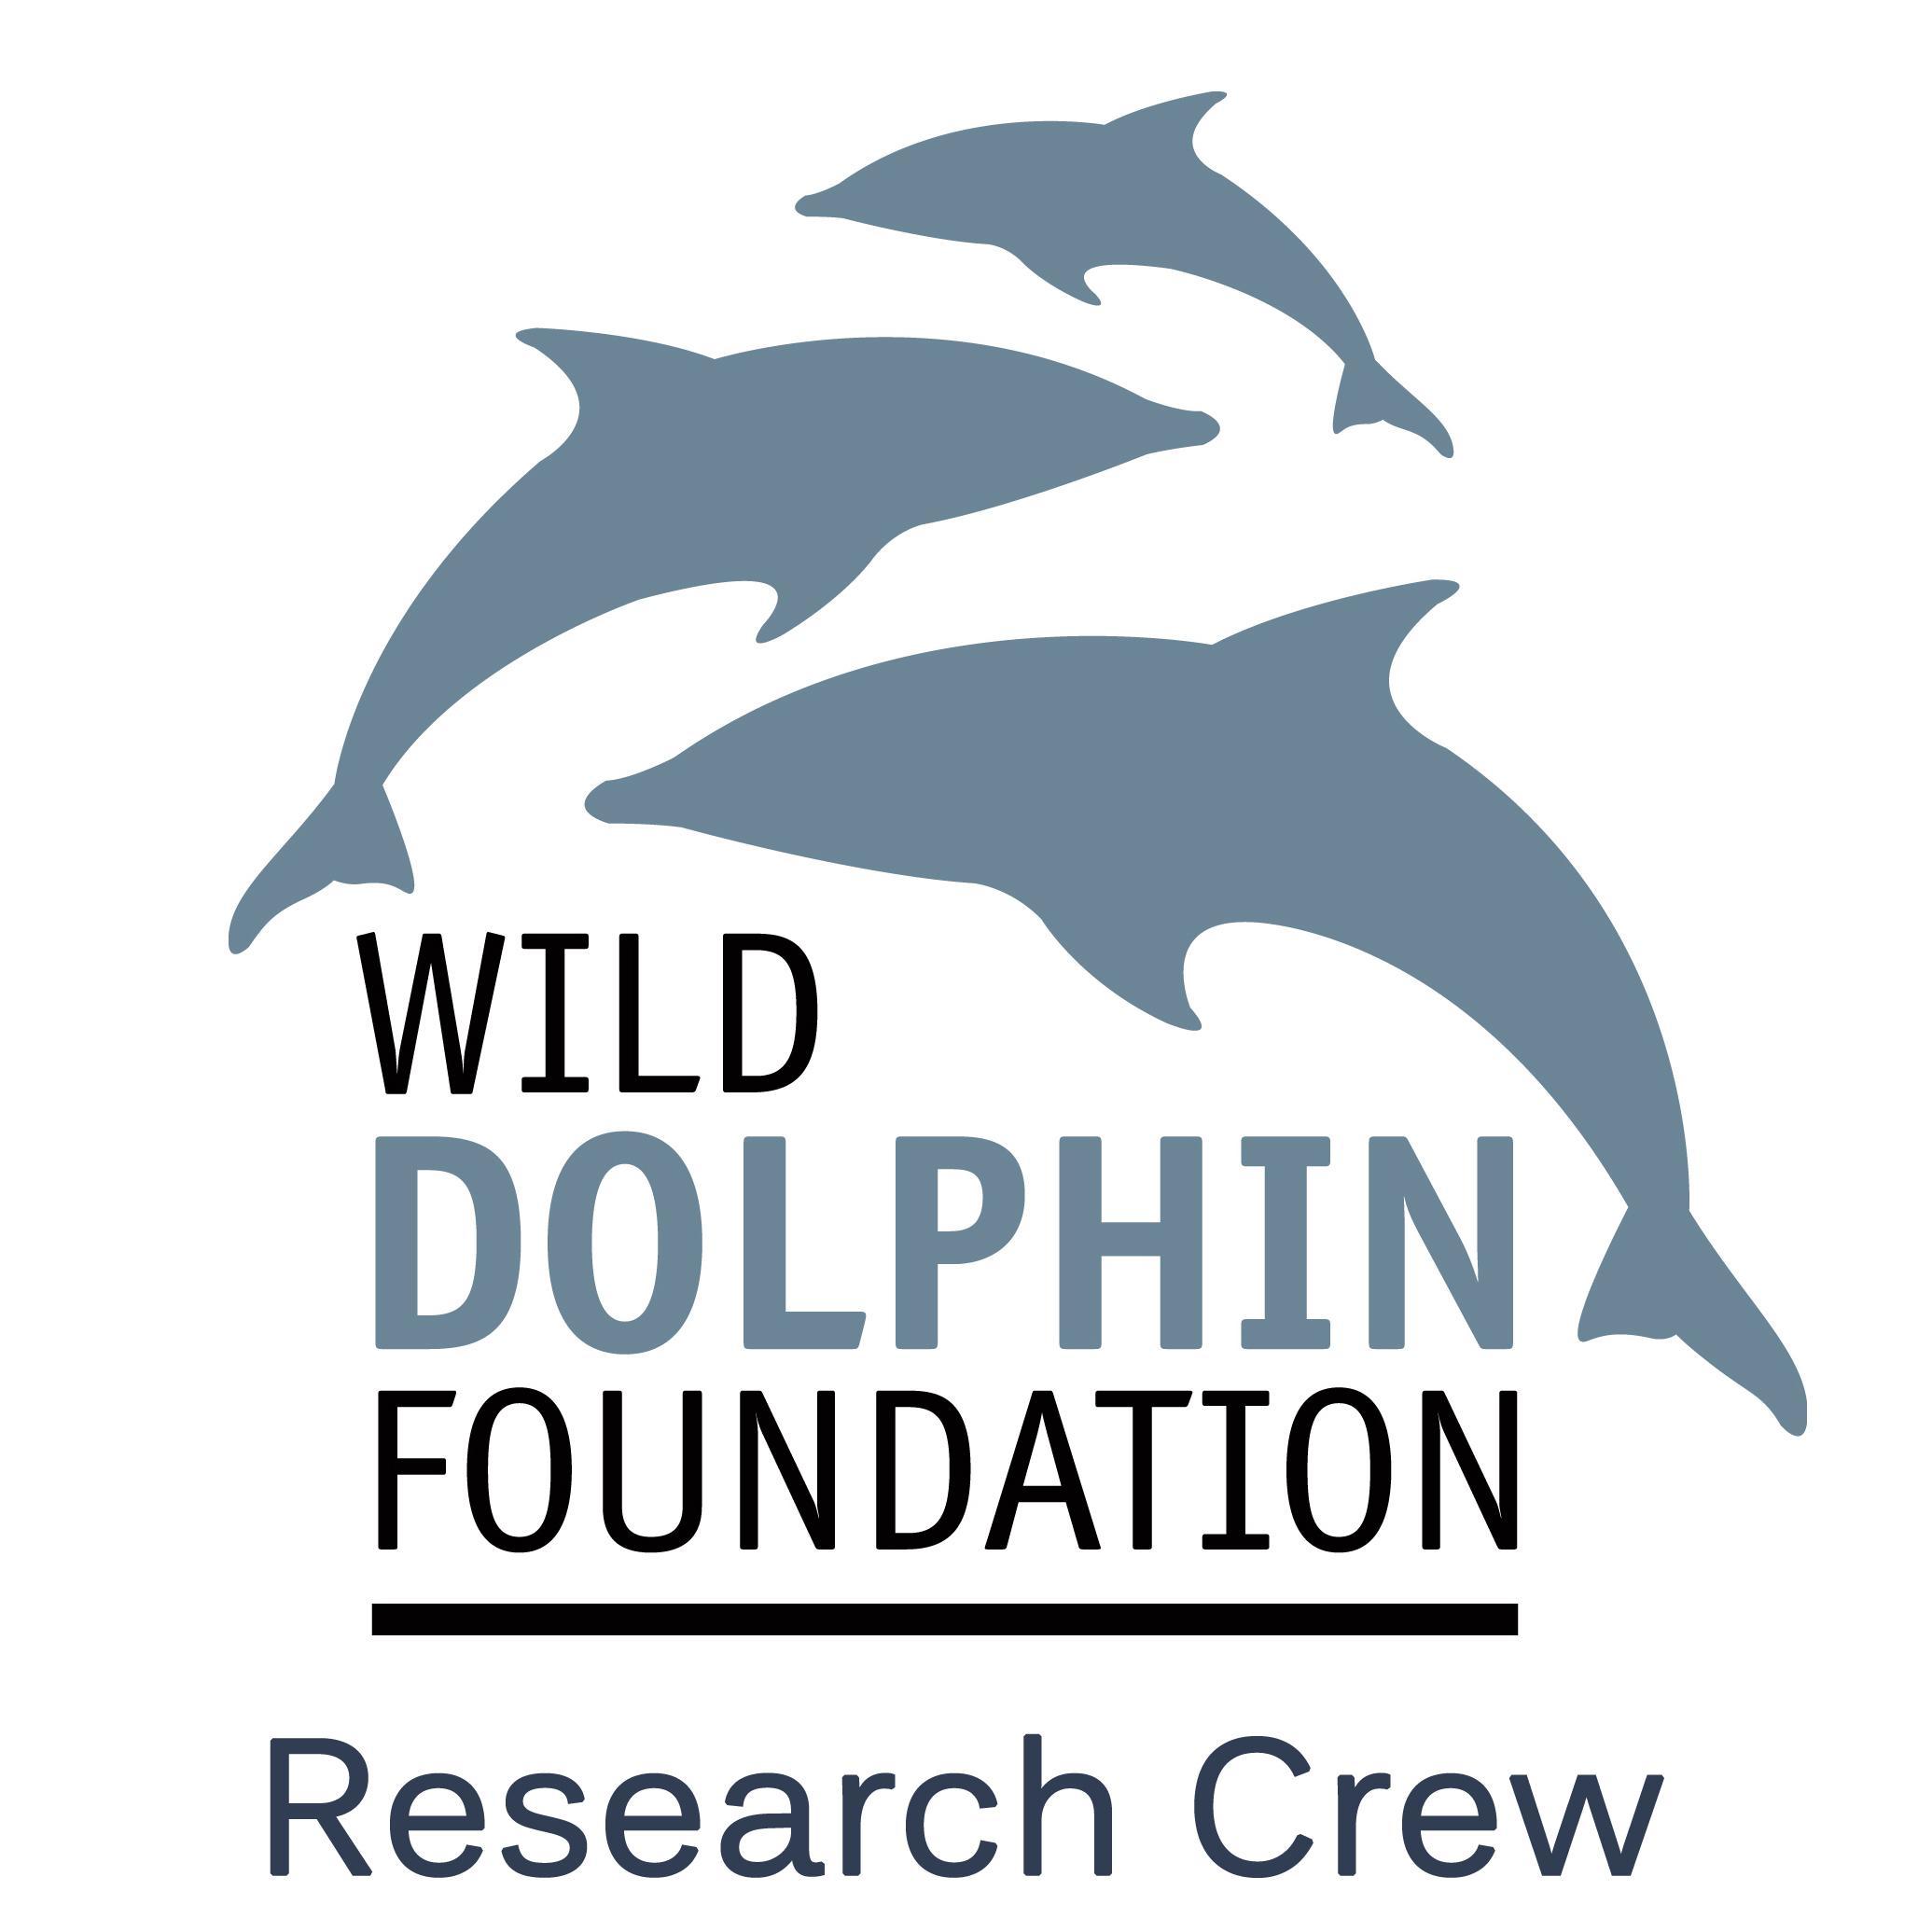 The Wild Dolphin Foundation protects dolphins through research, advocacy, and education. Our mission is to change human behavior threatening the dolphins.